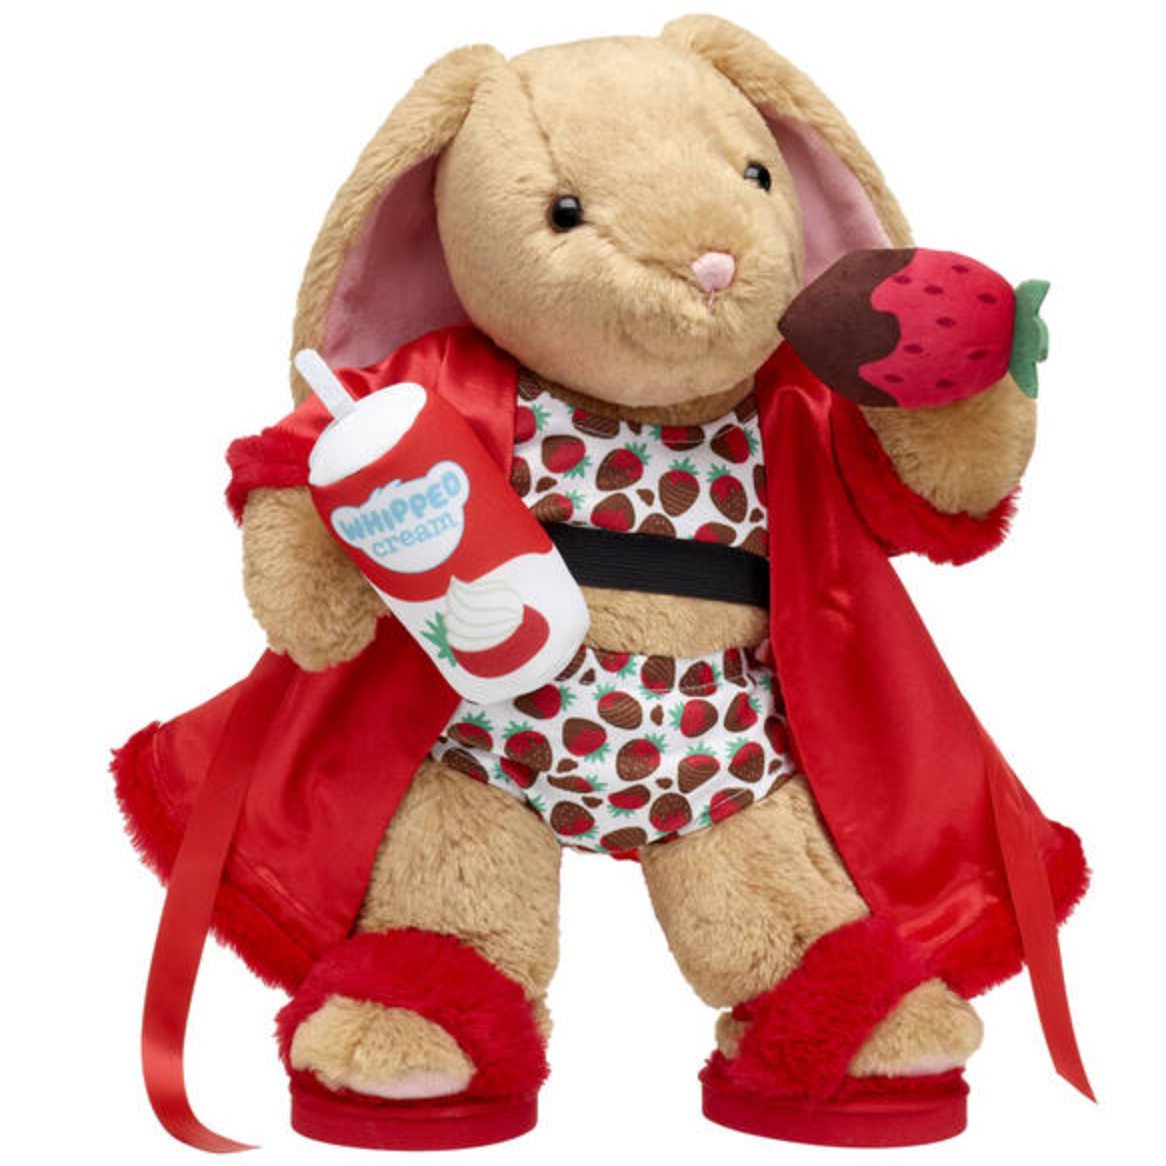 The BuildABear After Dark Collection GrownUp Teddy Bears